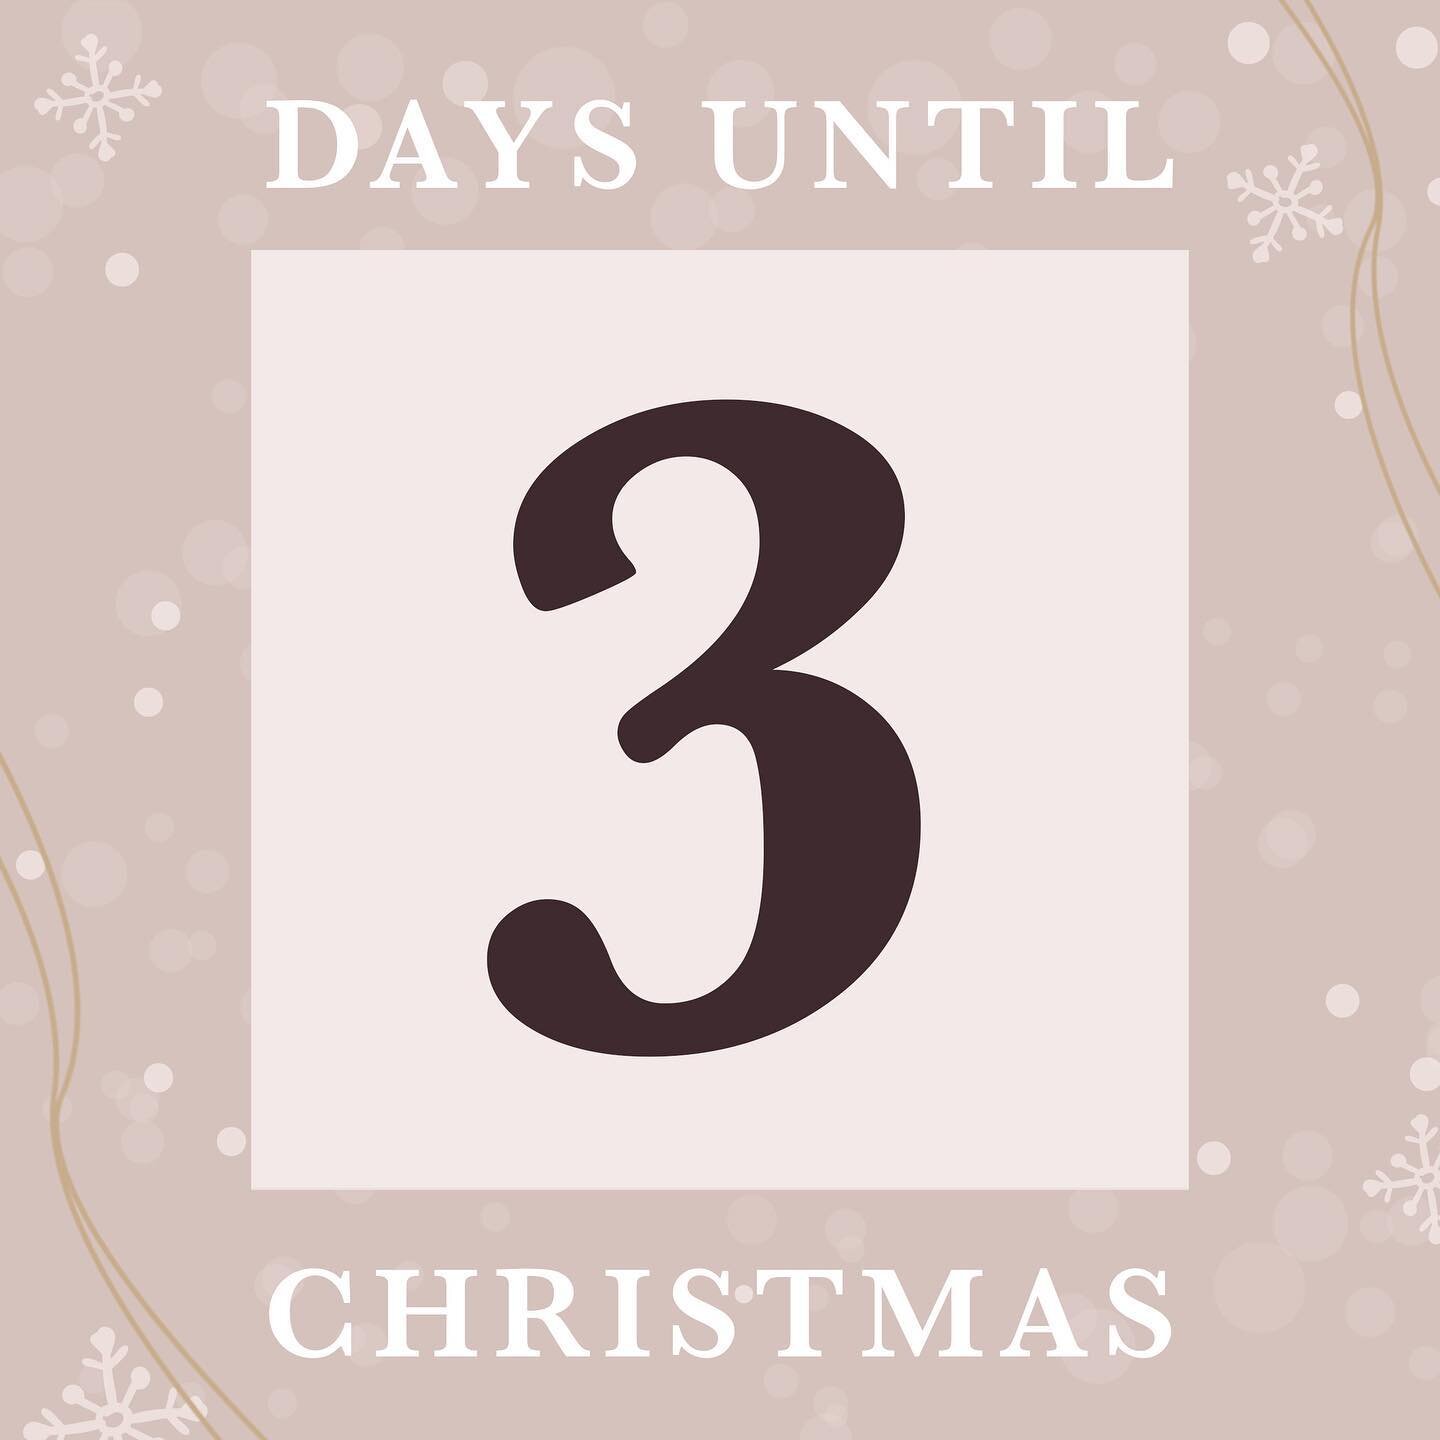 Three days left! Start slowing down and unwinding. Don&rsquo;t worry to much about all the gifts you have left to buy. Let it go and make this year about the time you spend with your family. We&rsquo;ve learned so much from this year, take that and r